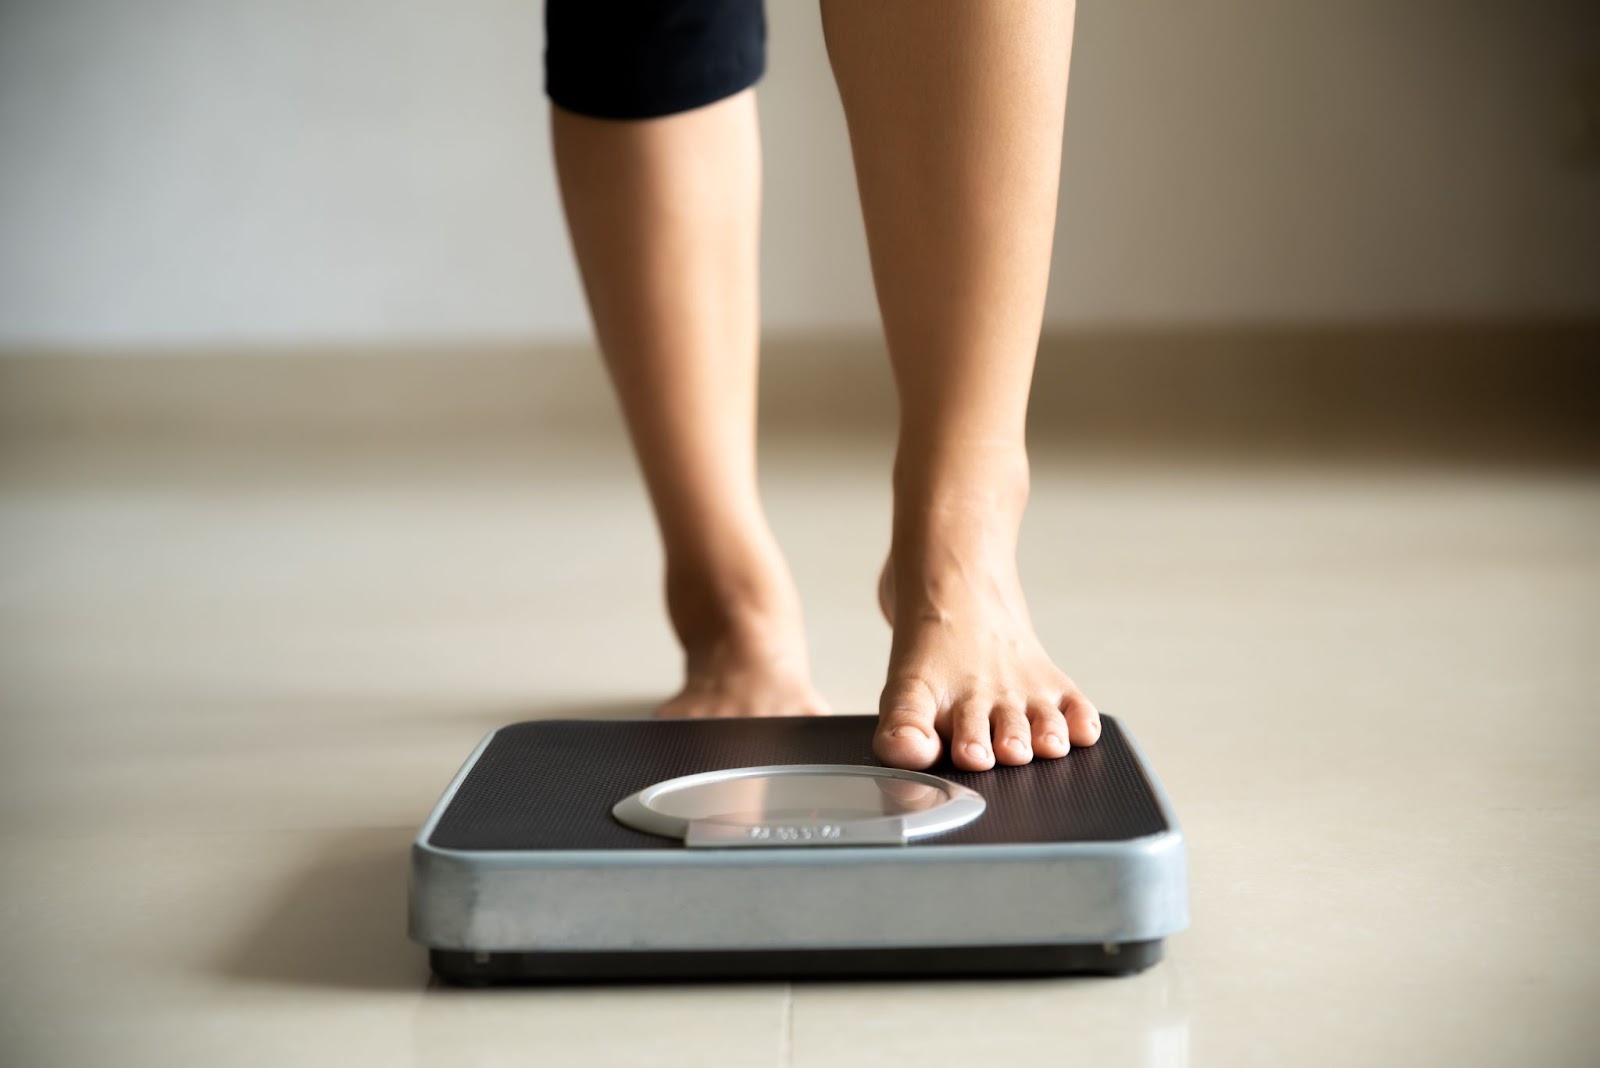 Woman nervously stepping on a scale to check her weight